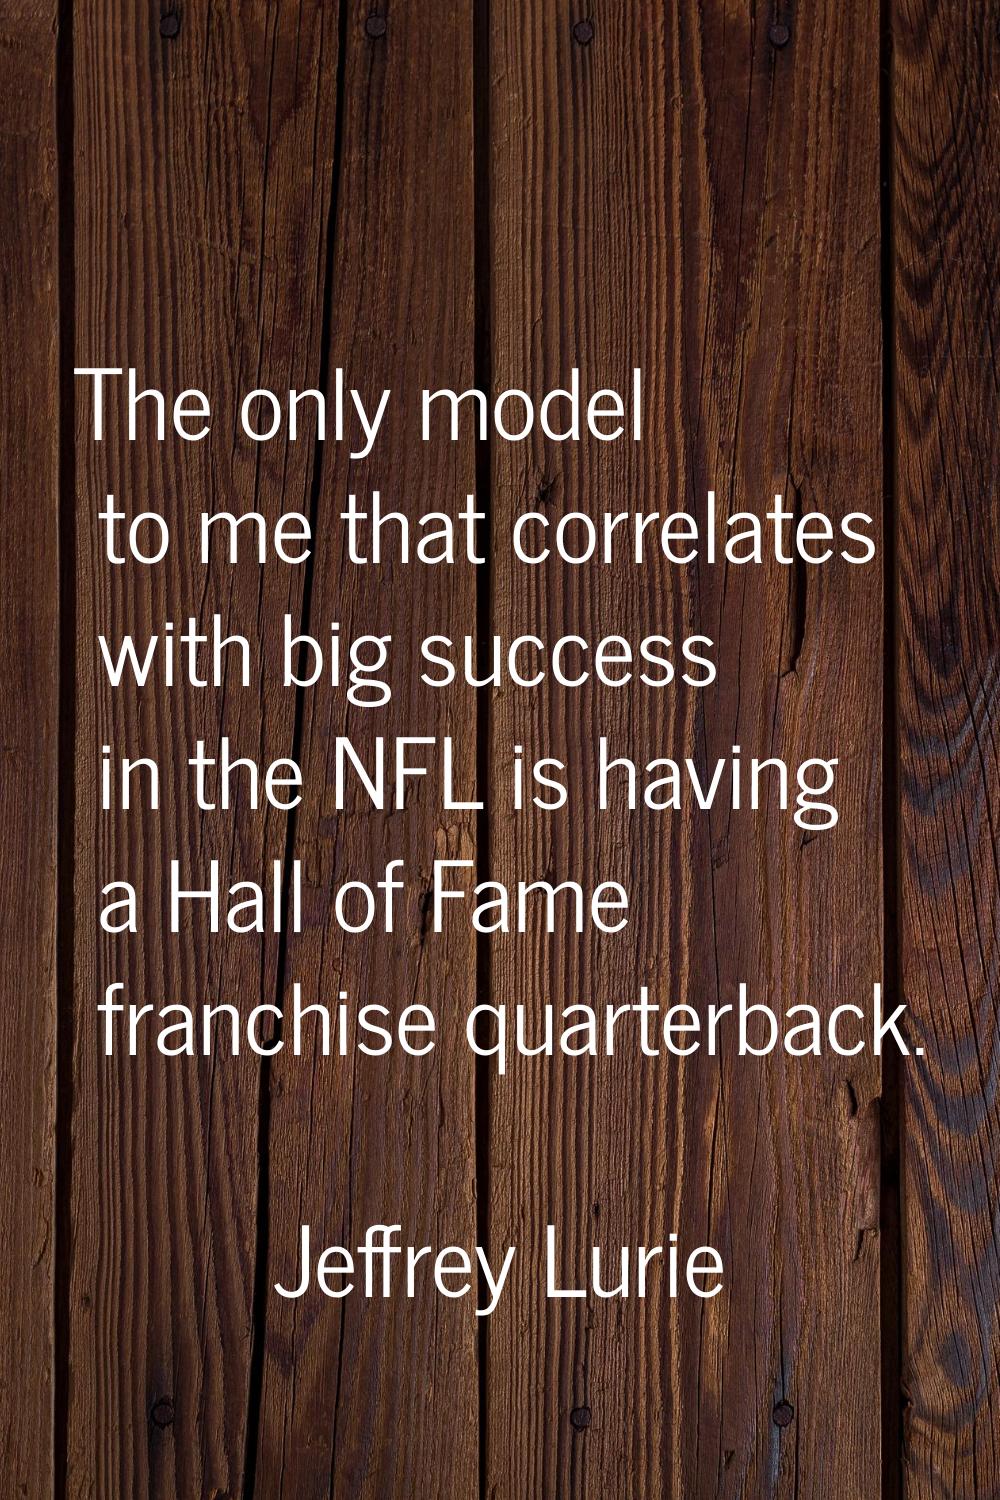 The only model to me that correlates with big success in the NFL is having a Hall of Fame franchise